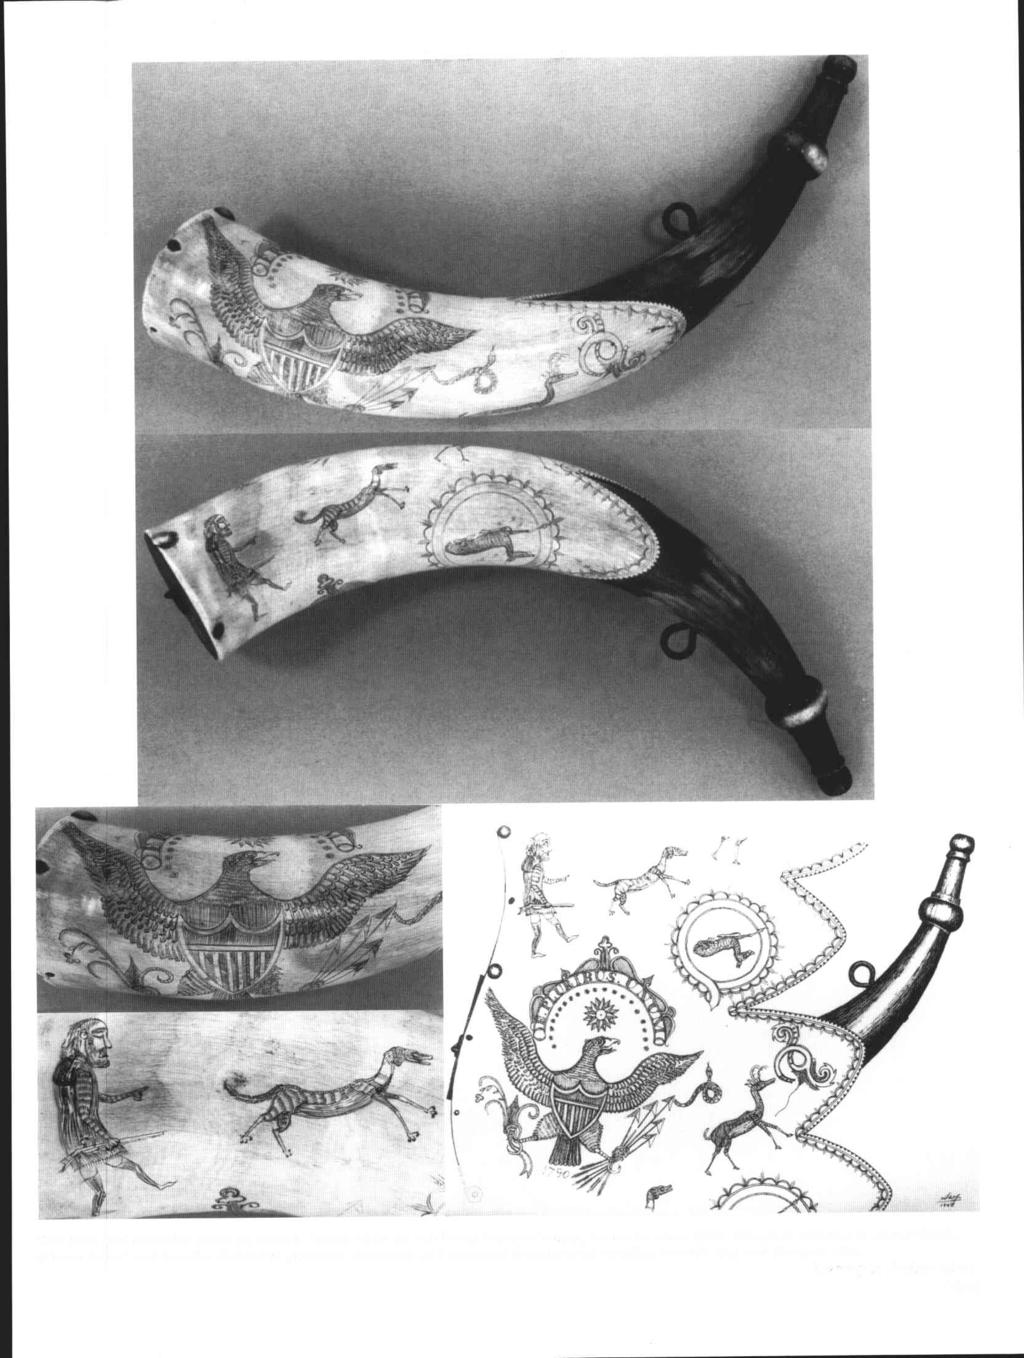 This horn was probably made by Francis Tansel while he was living in Scott